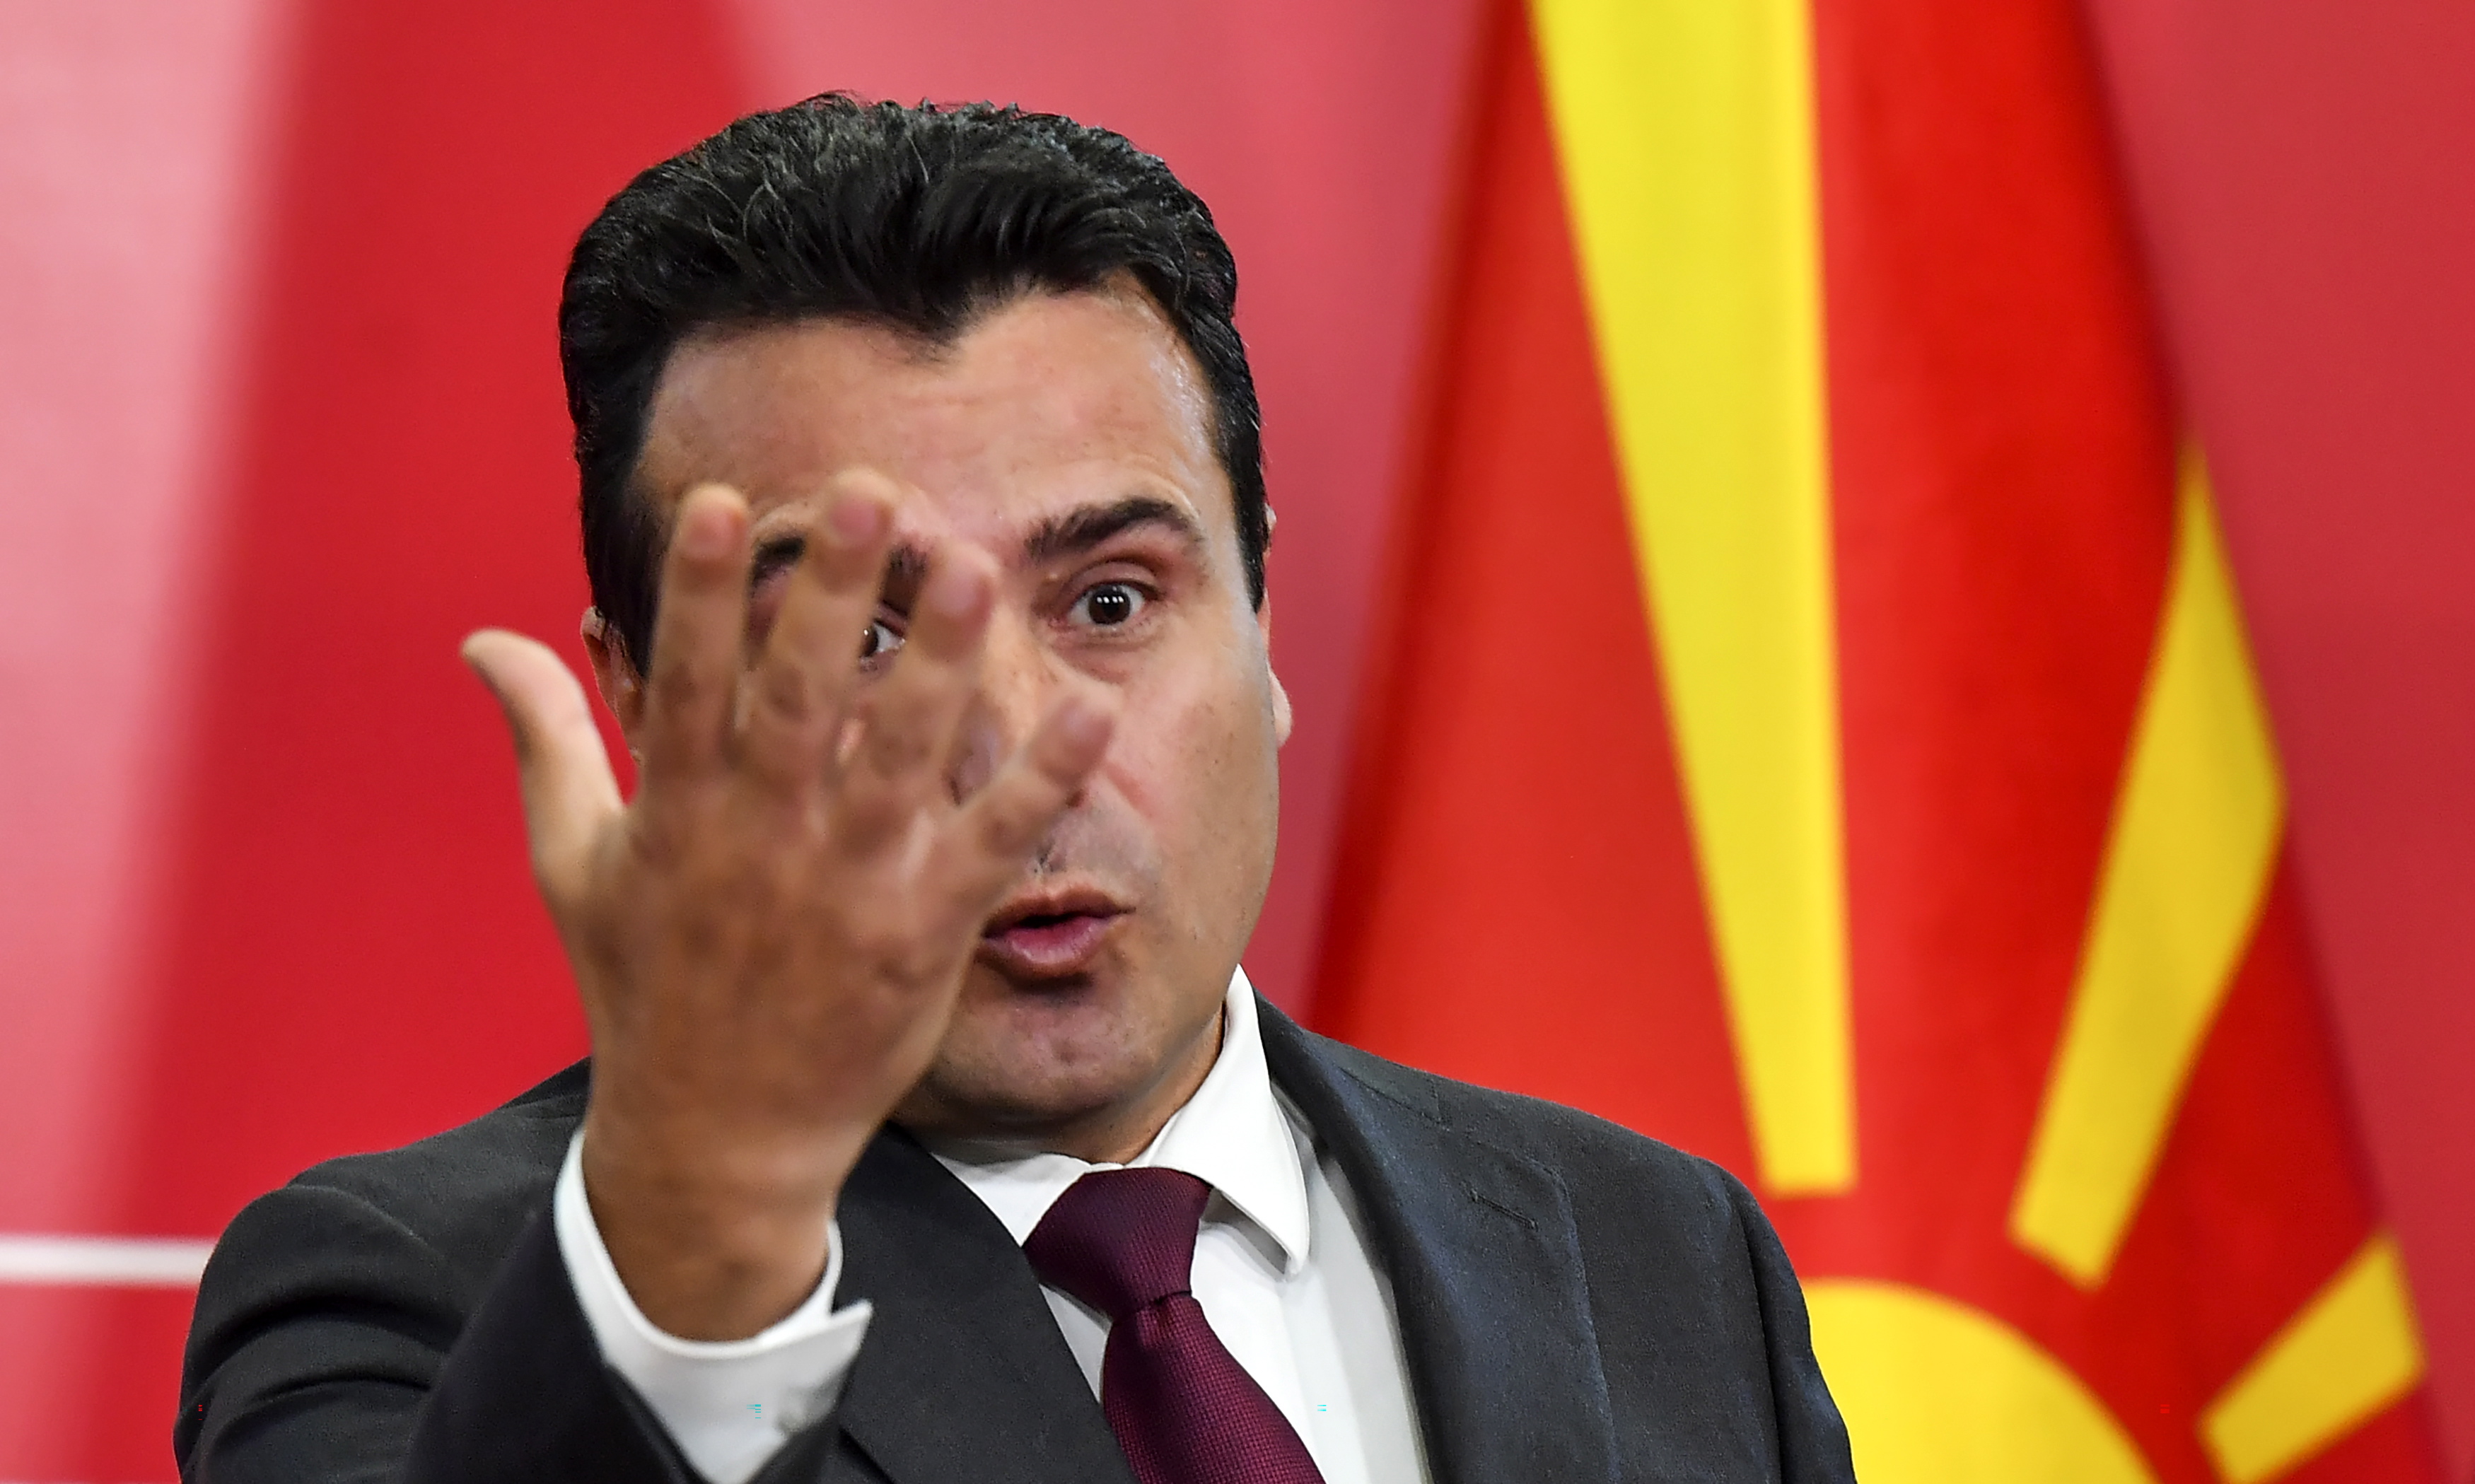 epa07933139 Macedonian Prime Minister Zoran Zaev addresses a press conference to announce early Parliamentary election, in Skopje, Republic of North Macedonia, 19 October 2018. Zaev called for early parliamentary elections a day after EU leaders delayed the decision for accession talks with North Macedonia and Albania for the third time as they gathered in Brussels for a two-day summit dominated by Brexit talks.  EPA/GEORGI LICOVSKI